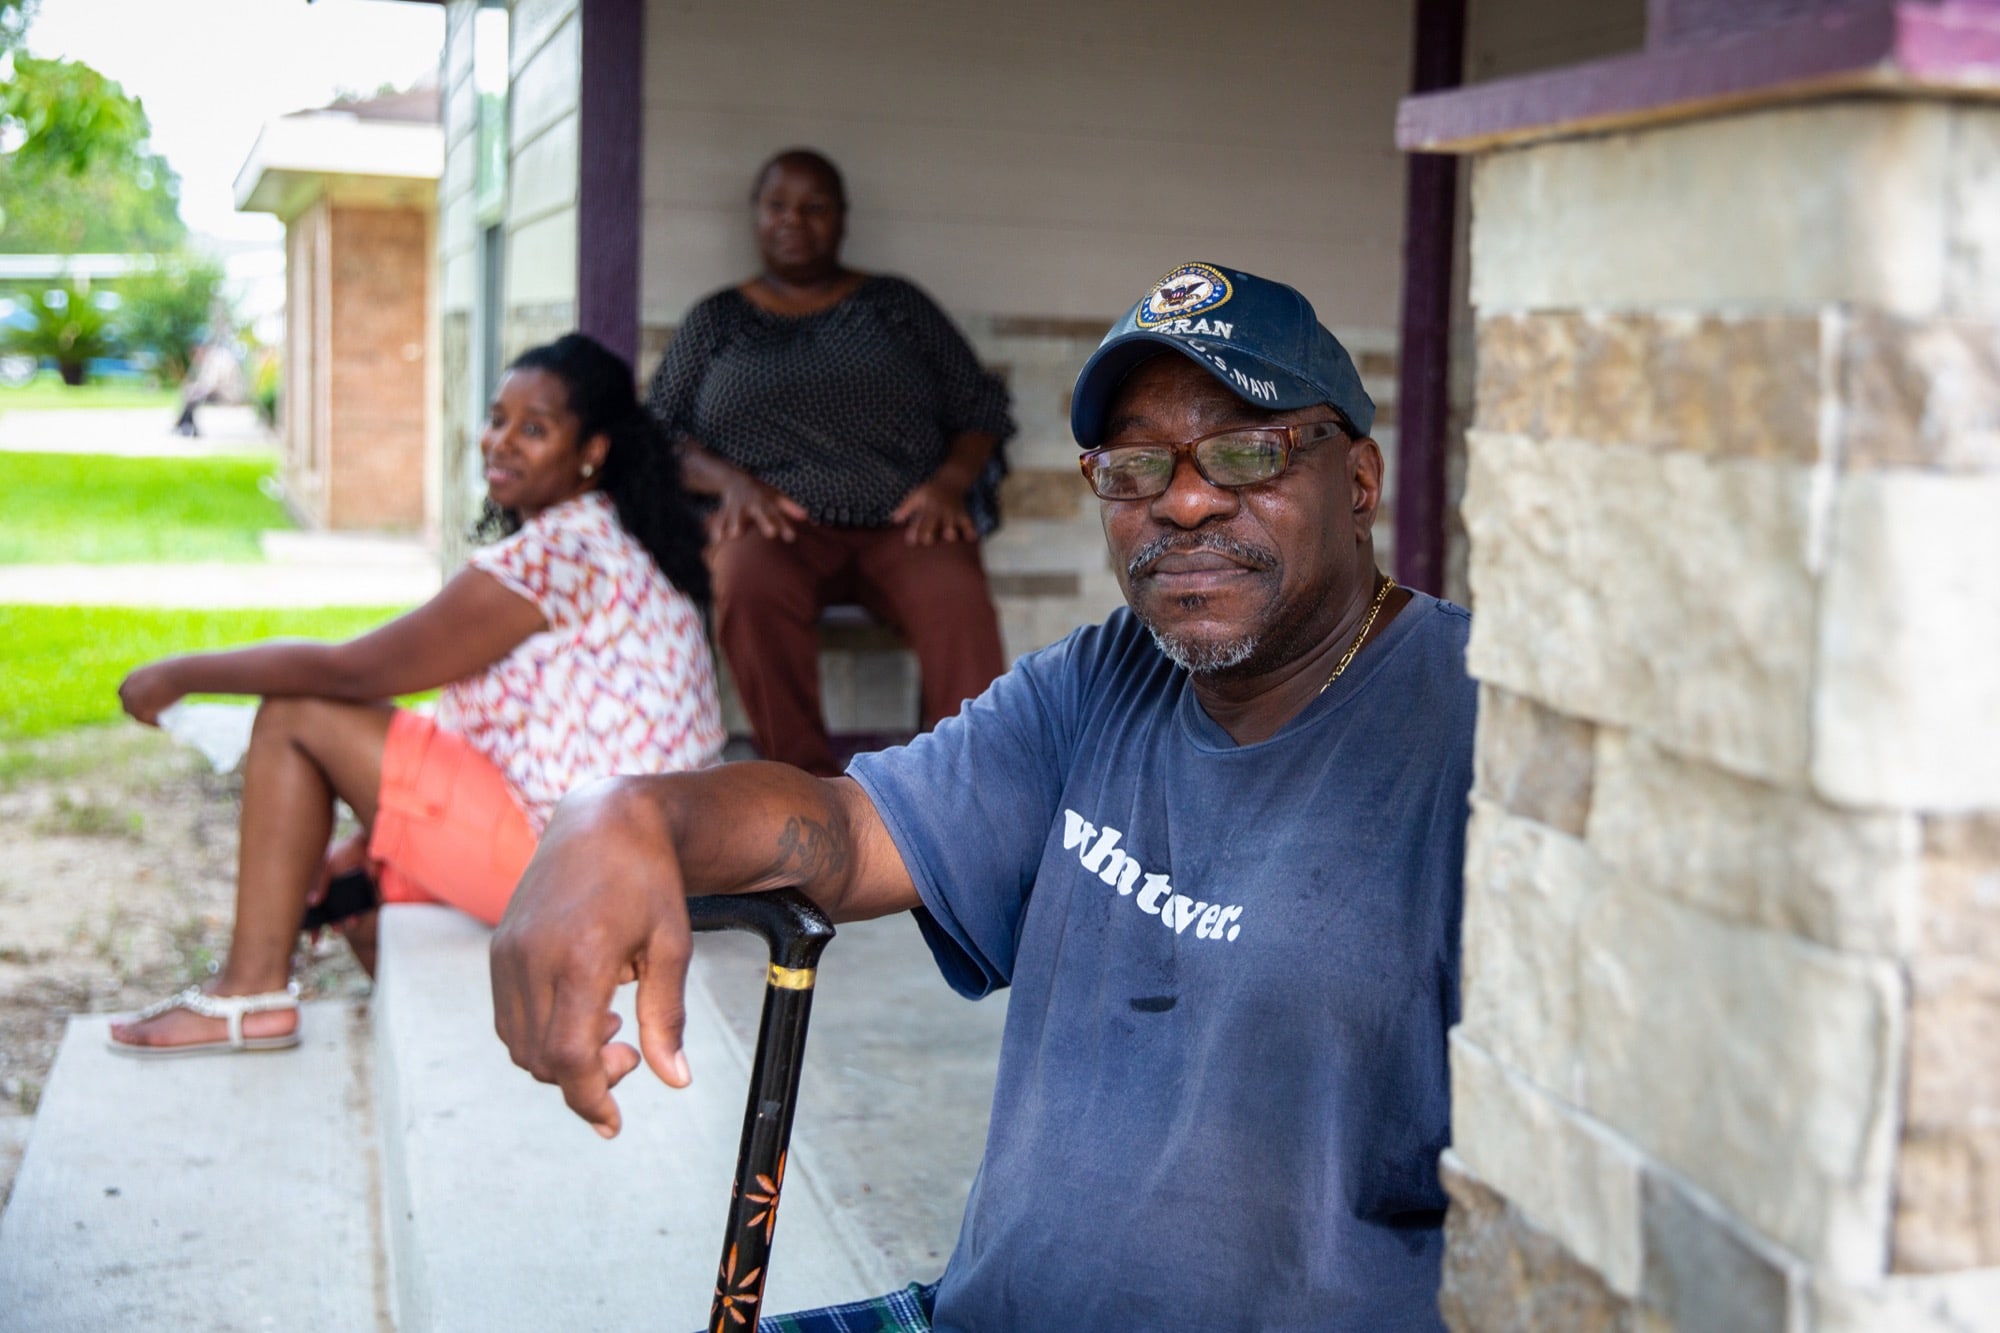 Forrester Johnson and his wife, Timeka (center), lived in a handicap-accessible FEMA trailer for 18 months after Hurricane Harvey hit Port Arthur, Texas. They moved back into their unfinished home when their lease of the trailer ended and FEMA began charging $750 a month for rent. Johnson now owes $1,500 he doesn't have because all their money has gone to rebuilding the house. (Stacy Fernández/News21)